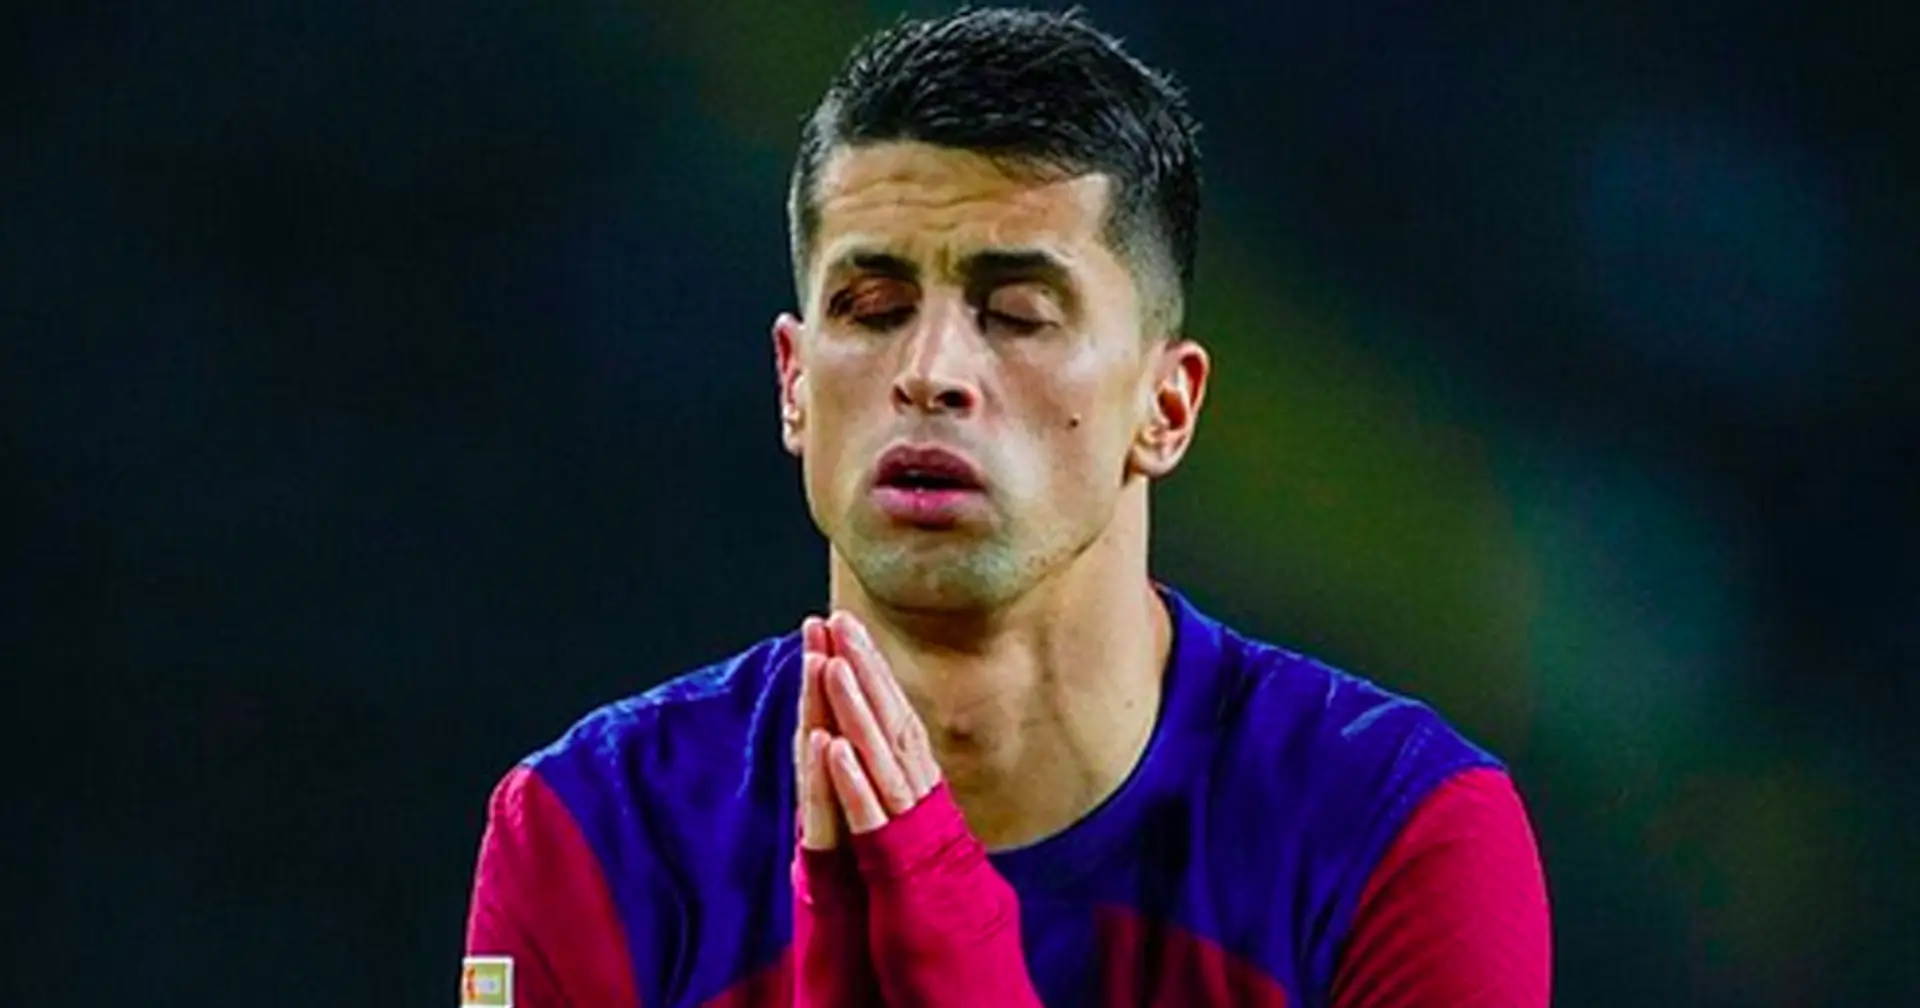 Real reason why Joao Cancelo missed Atletico clash revealed